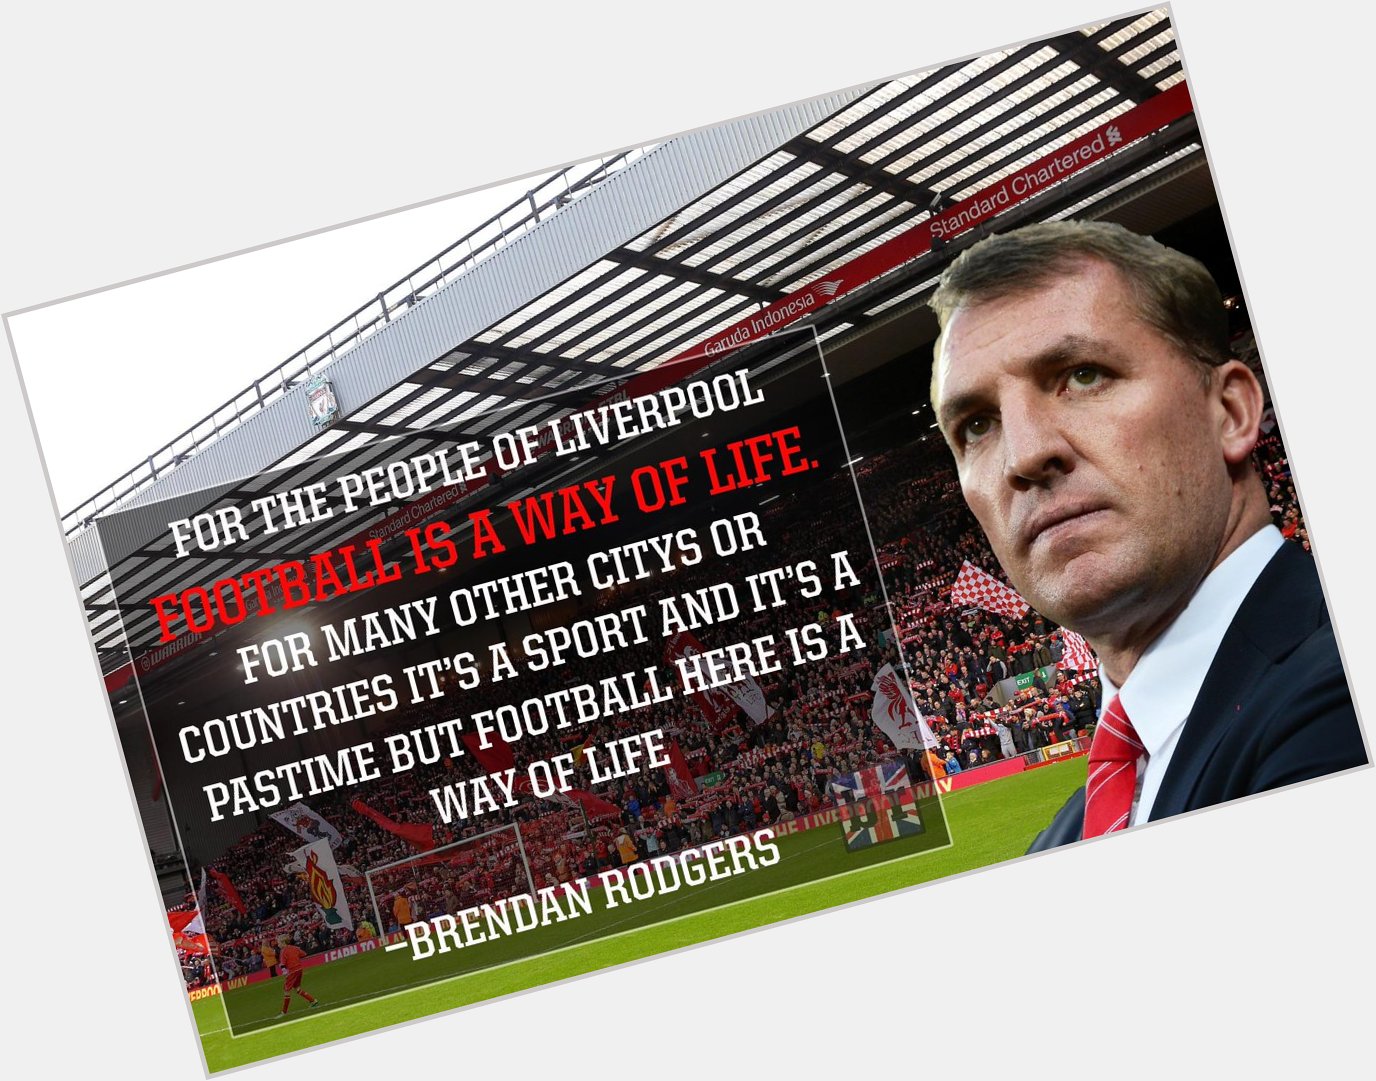 \" Happy Birthday to Liverpool manager Brendan Rodgers who turns 42 today. 